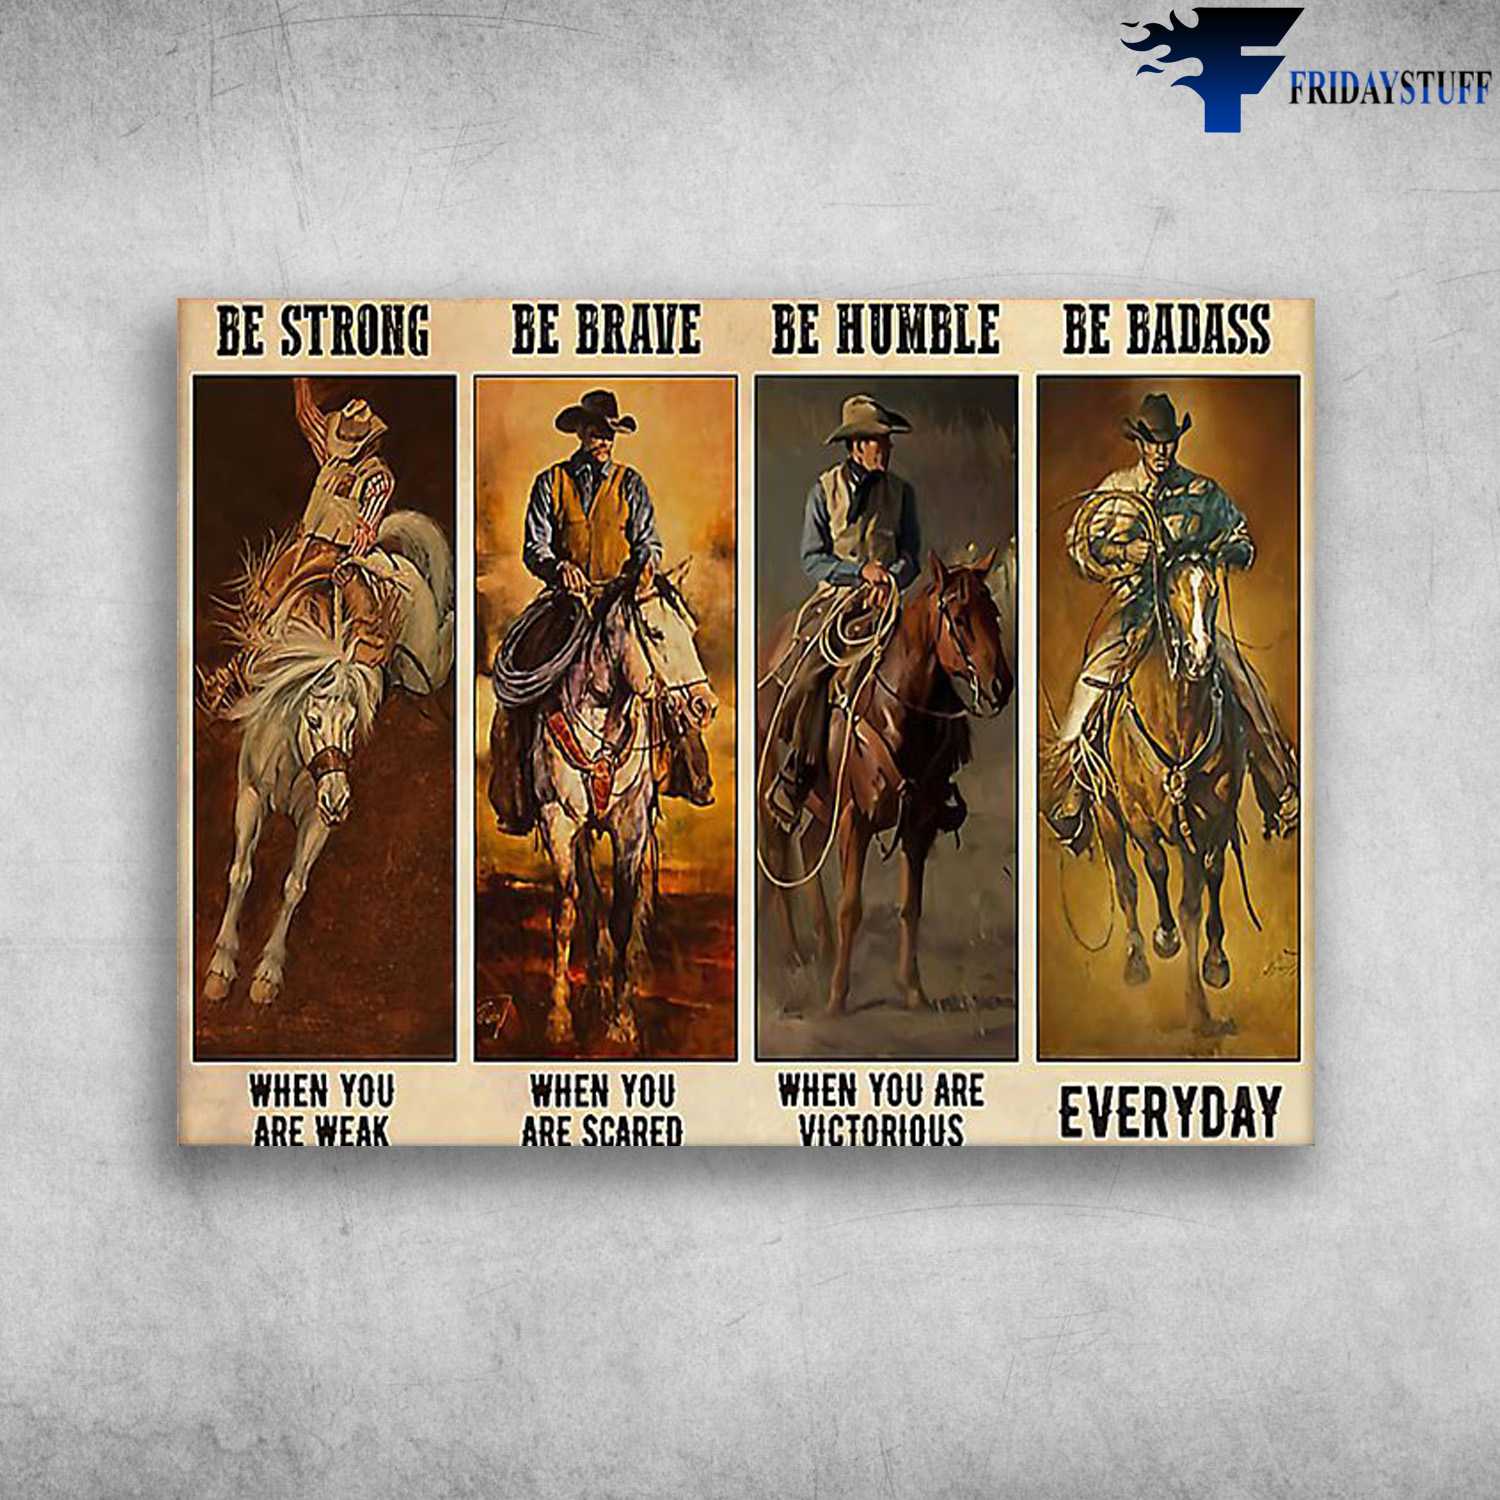 Cowboy Riding - Be Strong When You Are Weak, Be Brave When You Are Scared, Be Humble When You Are Victorious, Be Badass Everyday